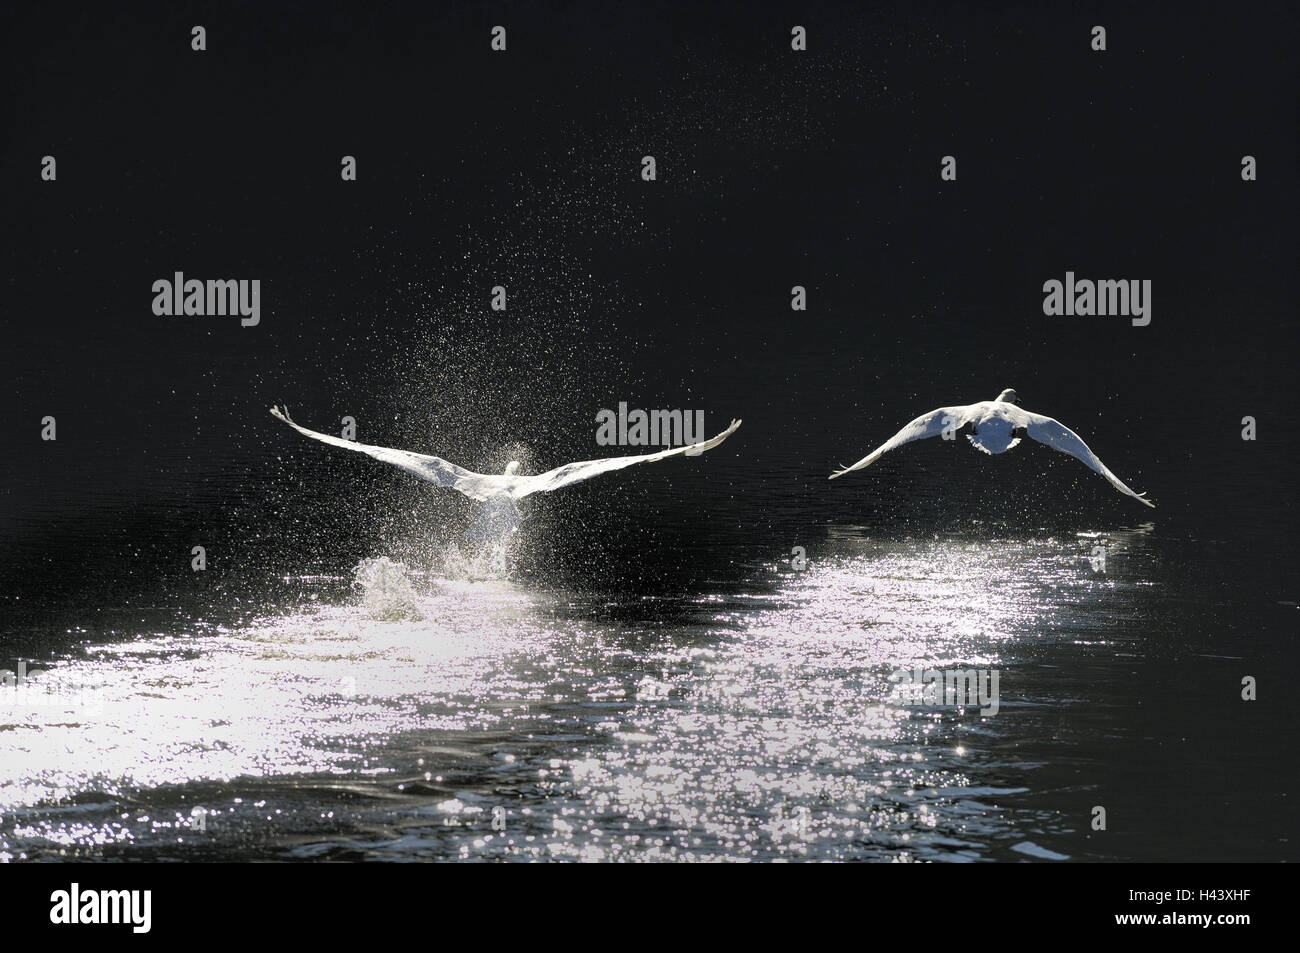 Lakes, hump swans, Cygnus olor, flight, waters, water drop, swans, goose's birds, anatids, water birds, two, bird's kind, fly, start, go hunting, trace, nature, animals, wild animals, animal world, animals, wild animals, white, Stock Photo